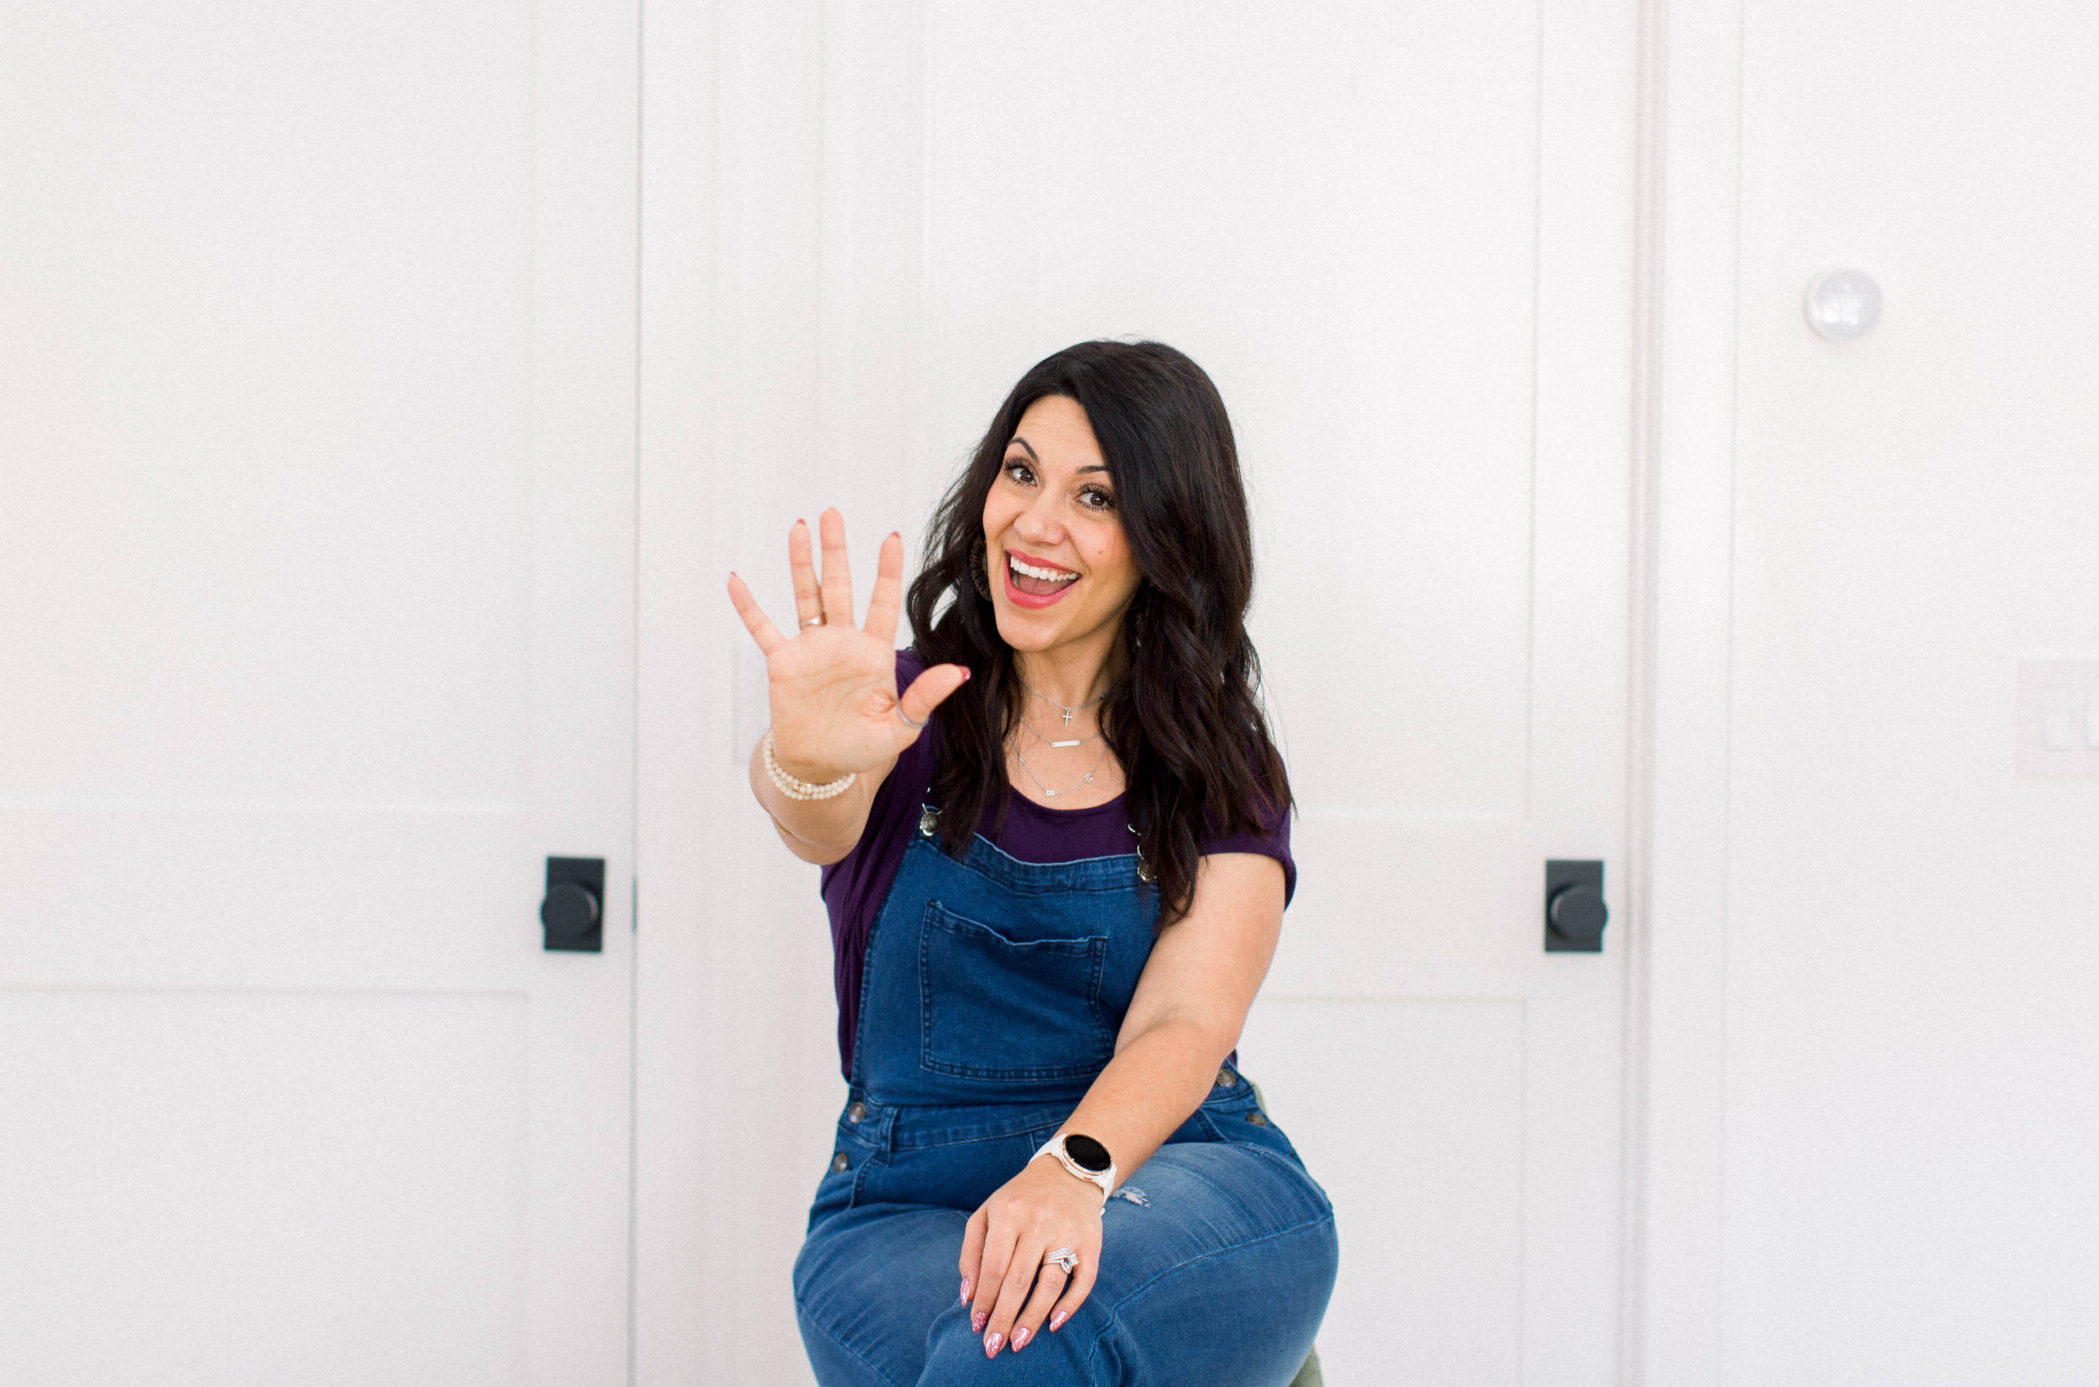 dark haired woman sittin on a stool in front of a white door. She is wearing a purple shirt with denim overalls. Her right hand is extended with all five fingers showing indicating a quantity of five.